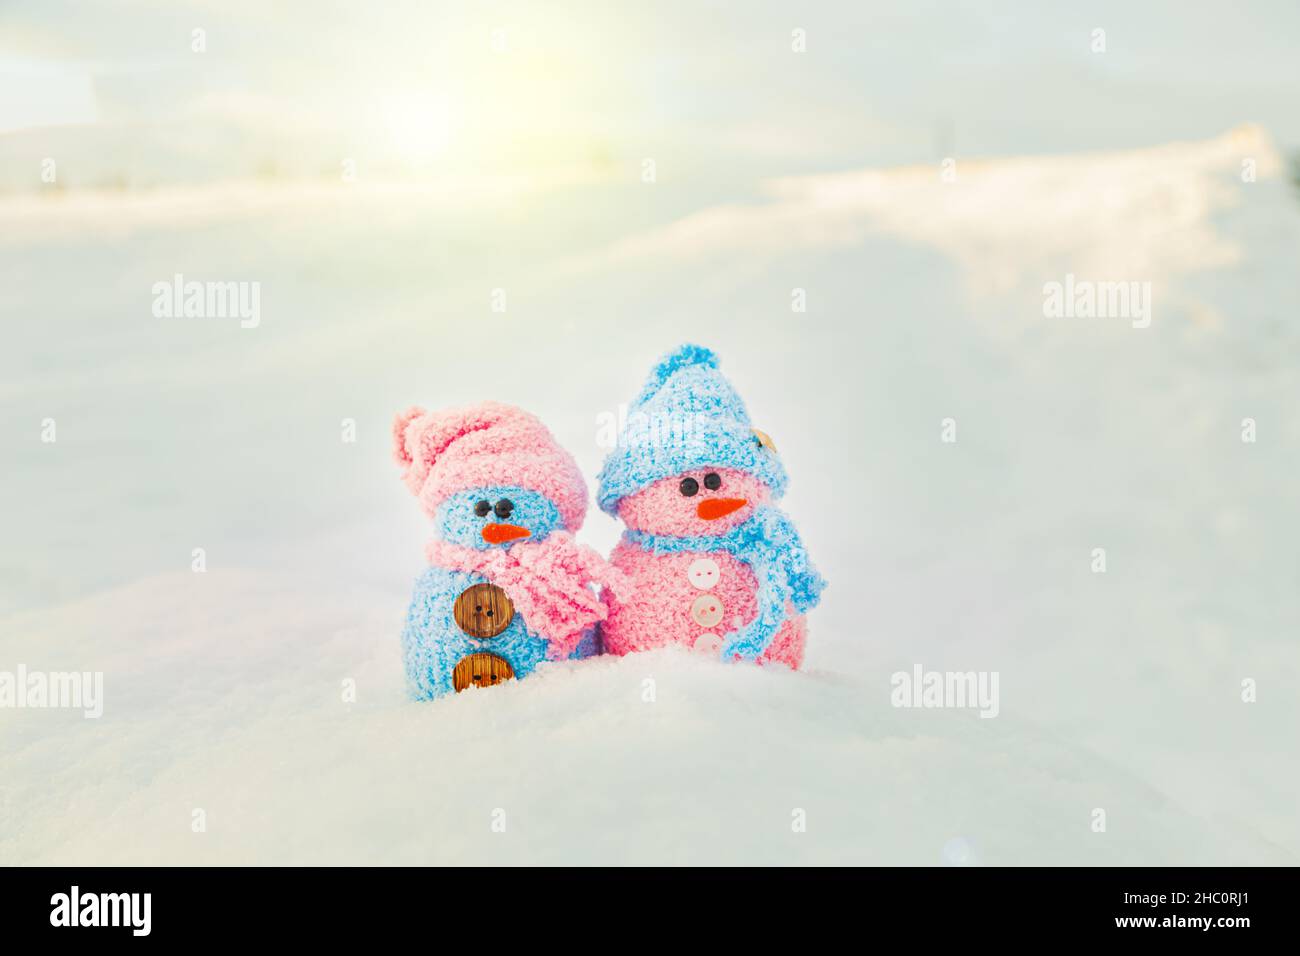 Cute homemade snowmen with scarves and hats. Winter's Tale. Greeting card with copy space. Winter background. Stock Photo